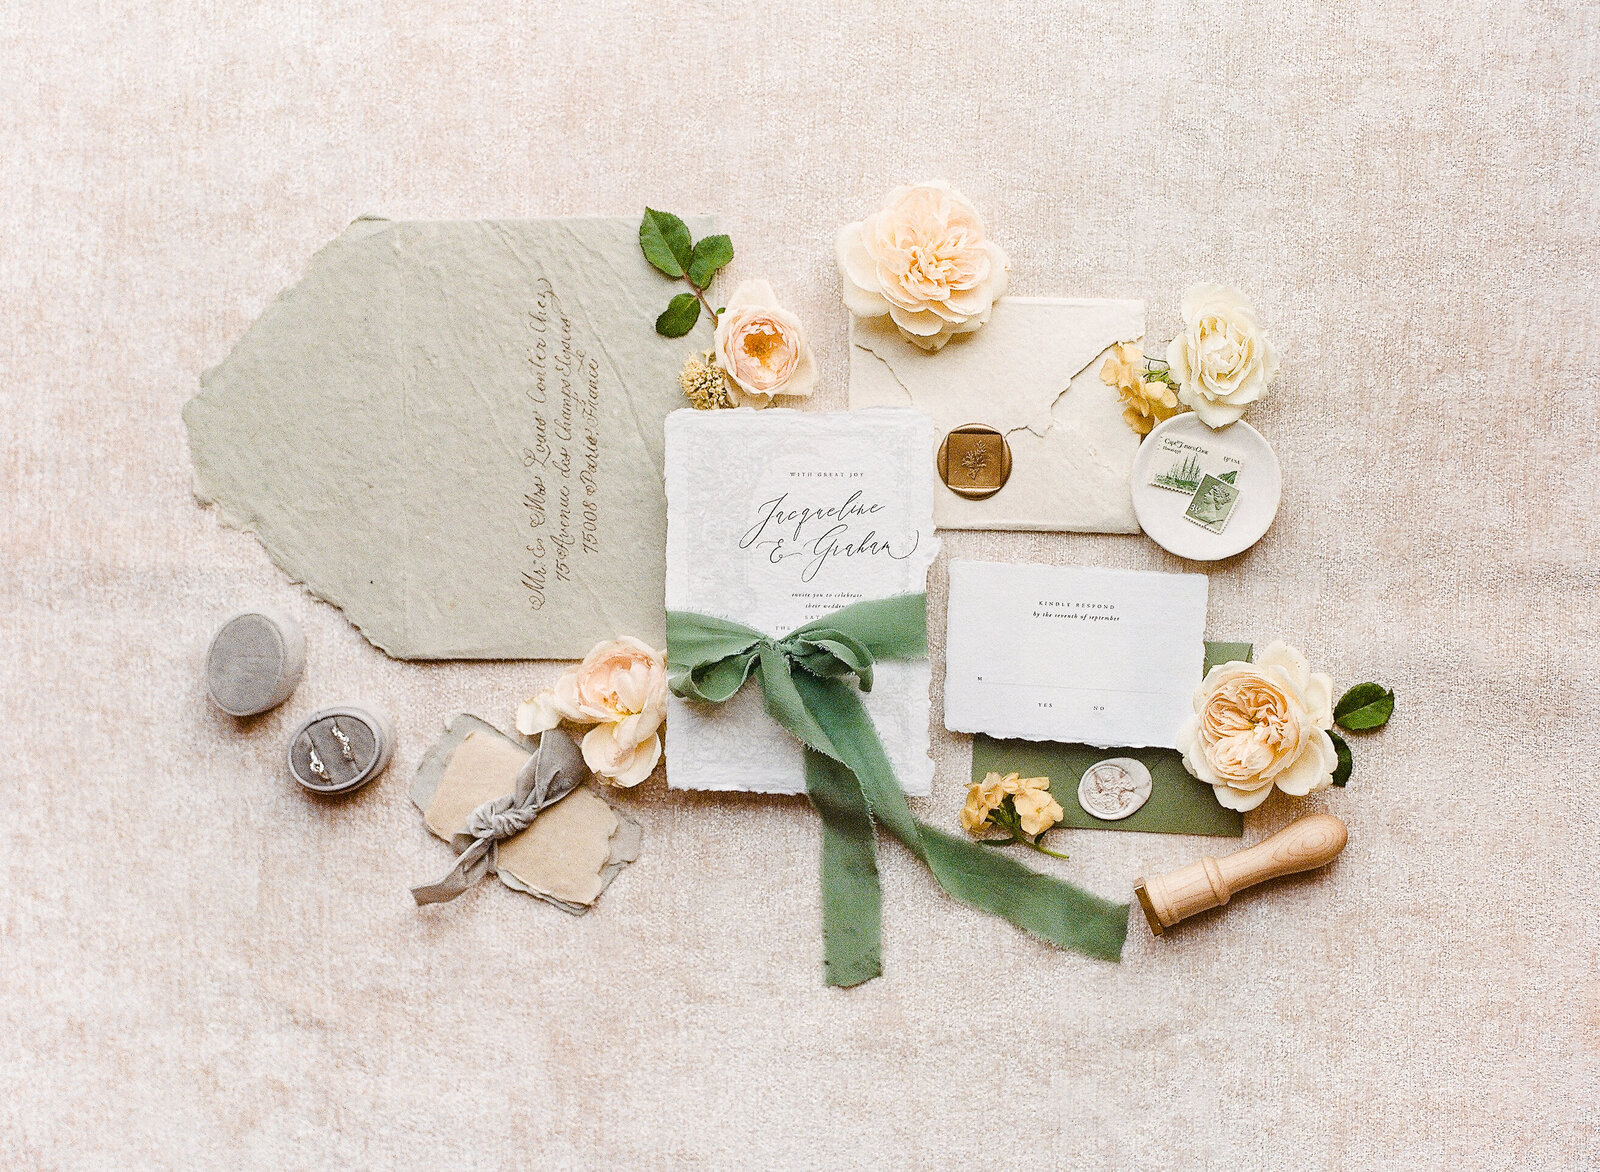 Italian wedding inspired invitation suite with greens and neutrals.